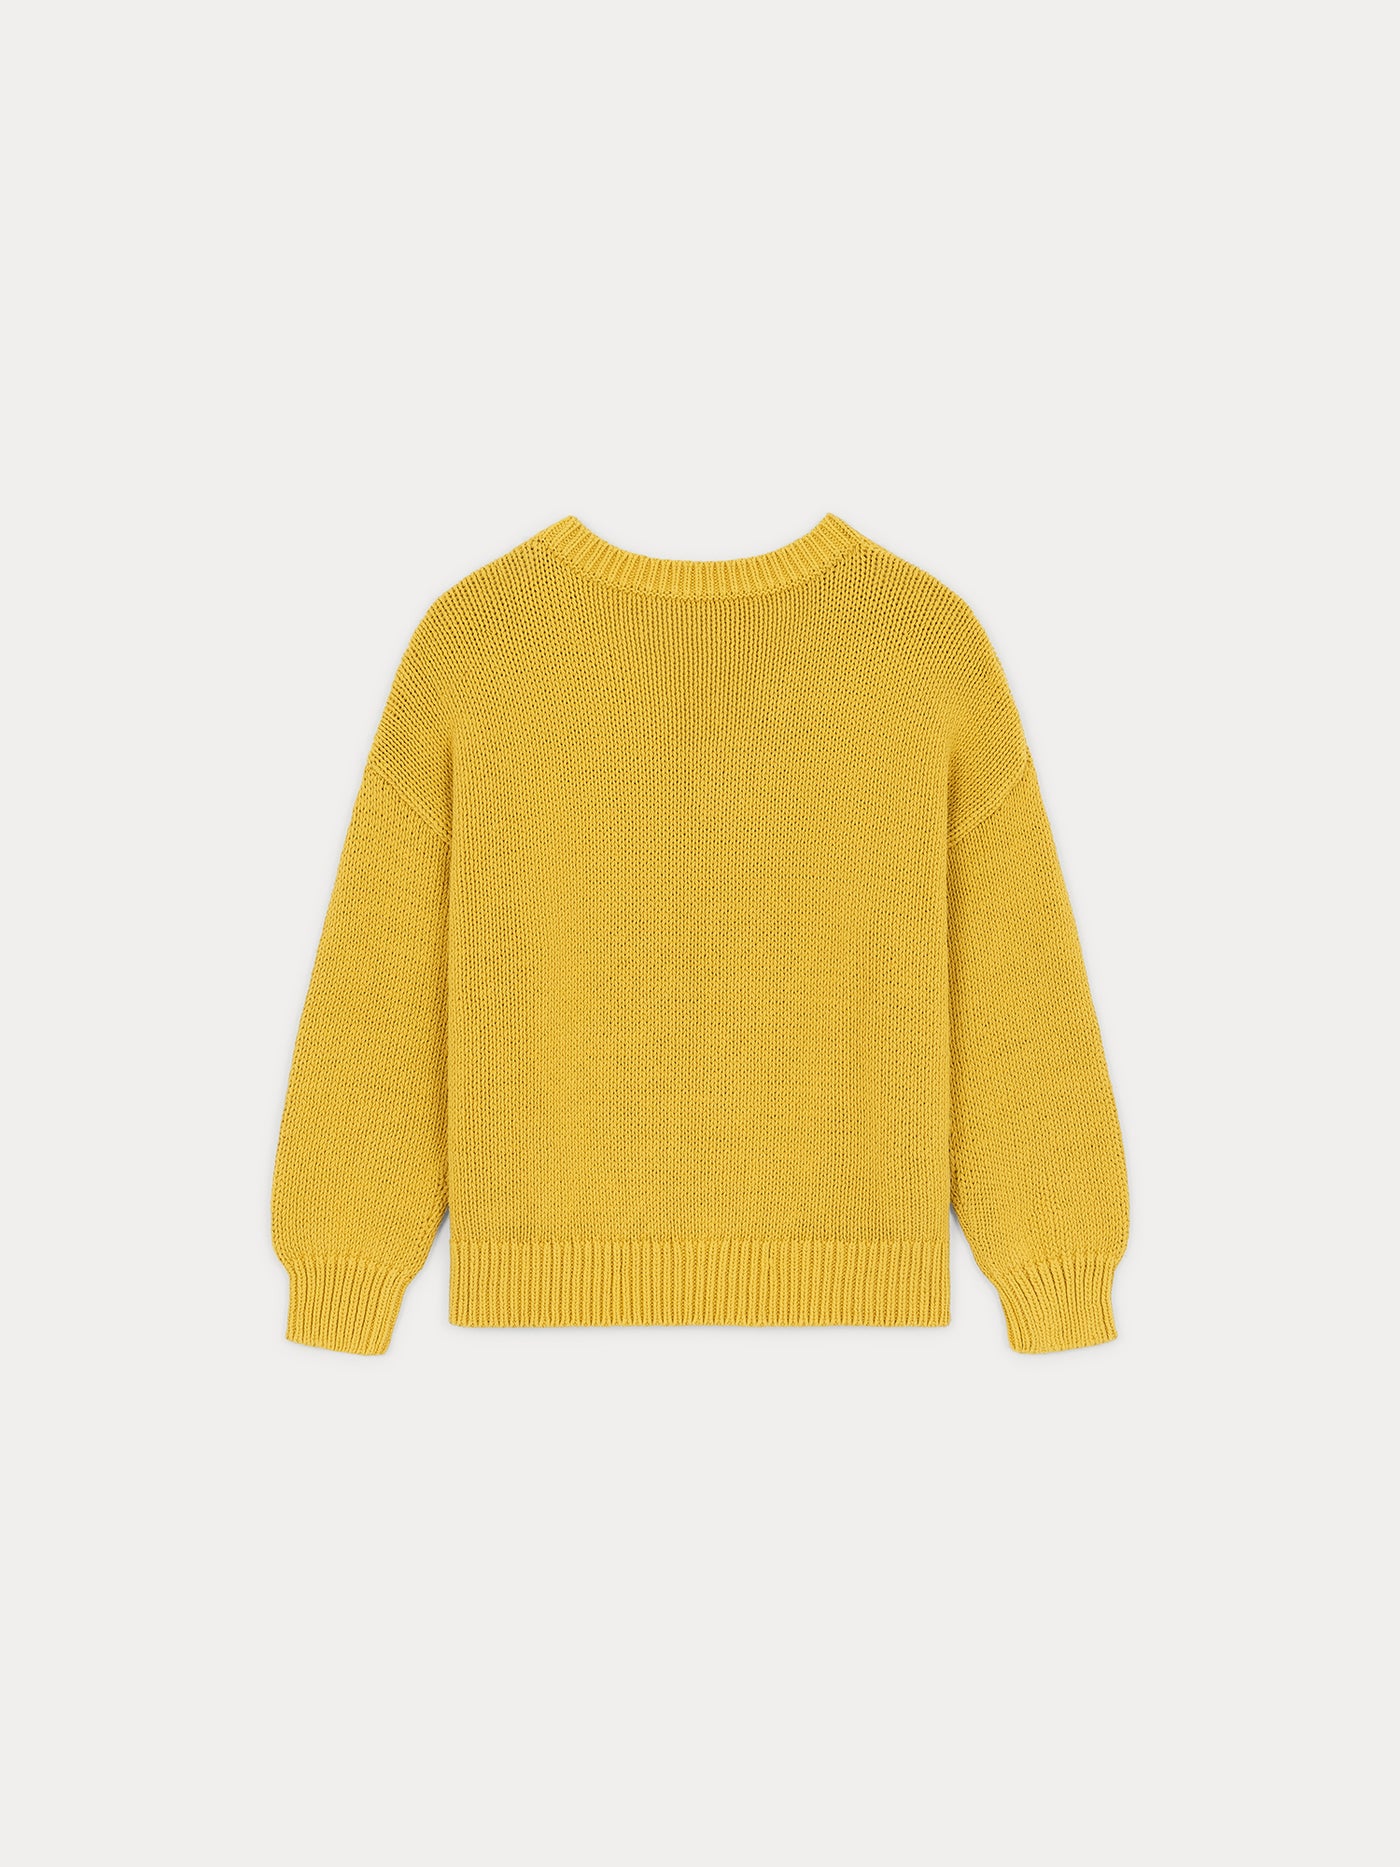 Chunky knit v-neck sweater in yellow cotton